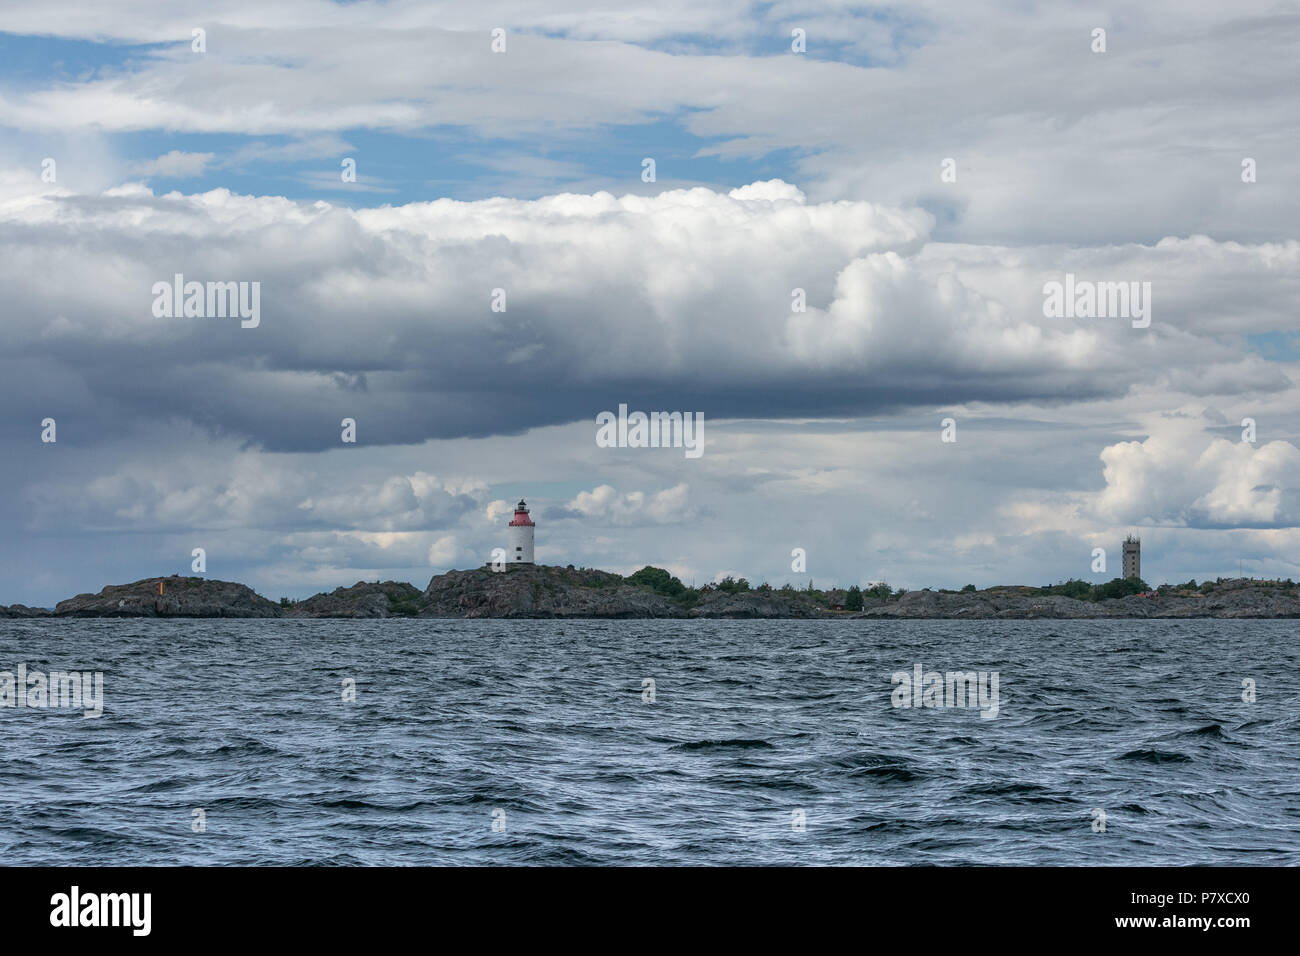 A lighthouse in the sea with dramatic sky. Stock Photo